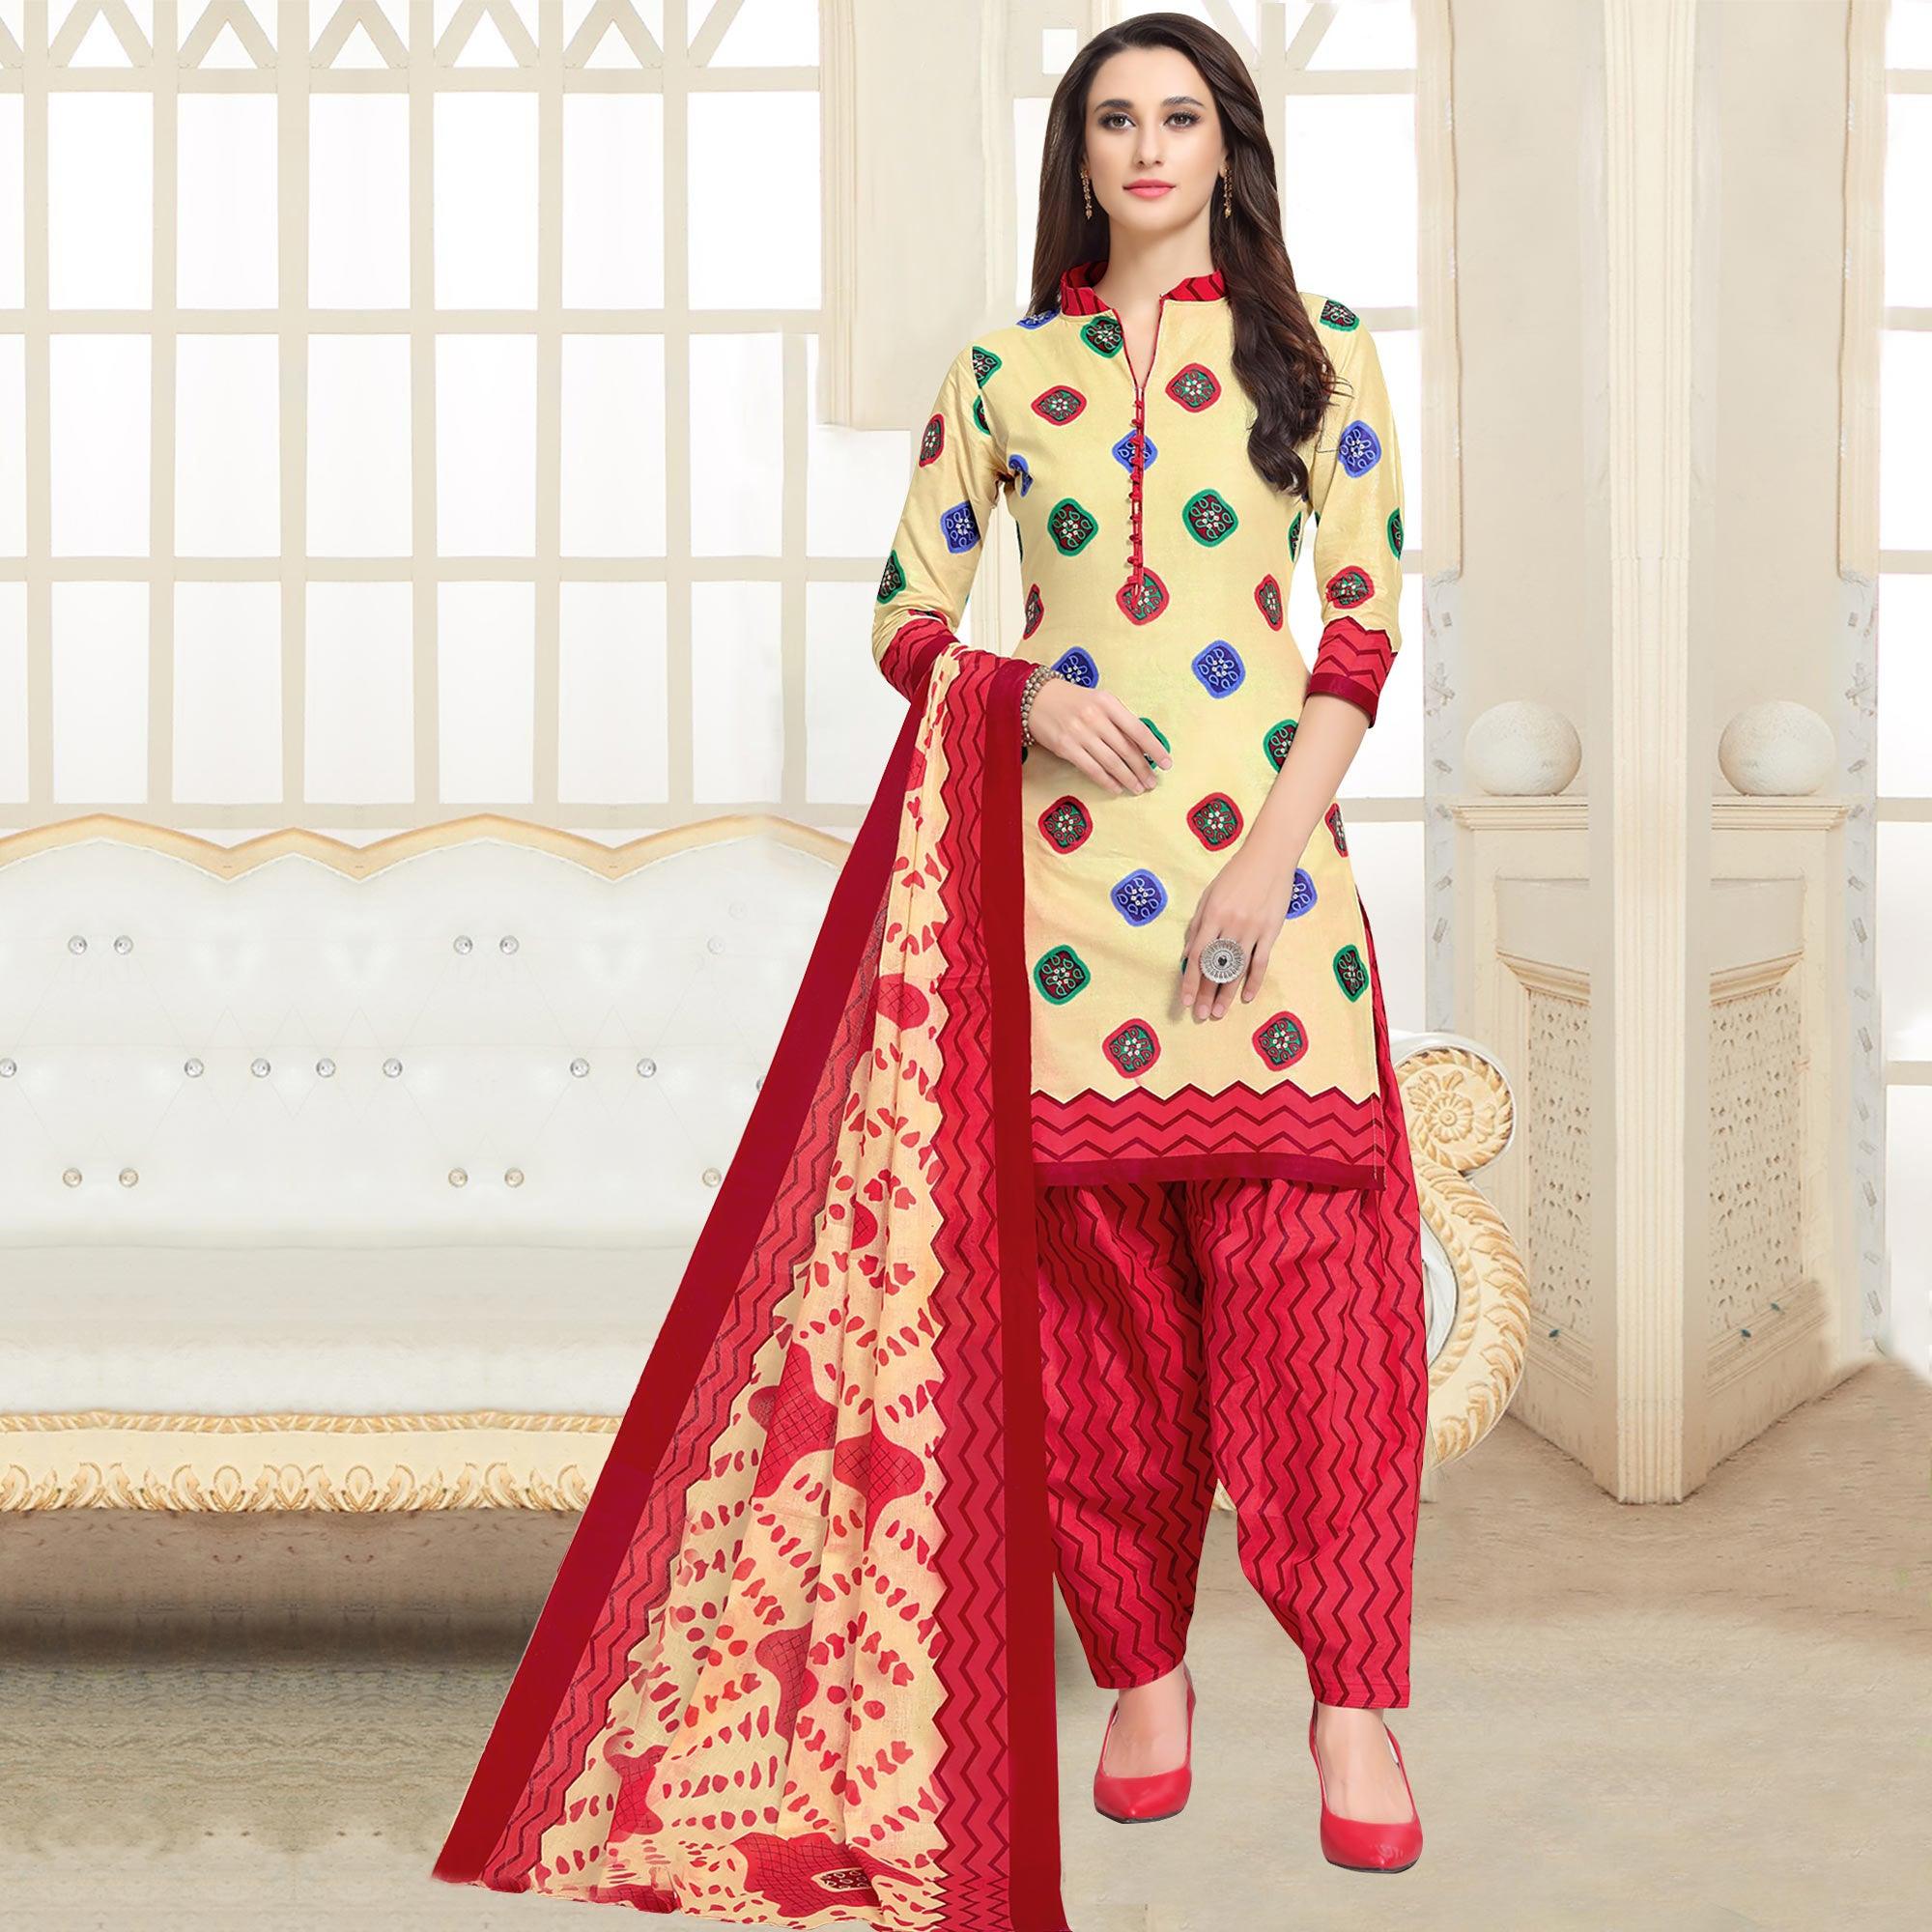 Engrossing Cream-Red Colored Casual Wear Printed Cotton Patiala Dress Material - Peachmode